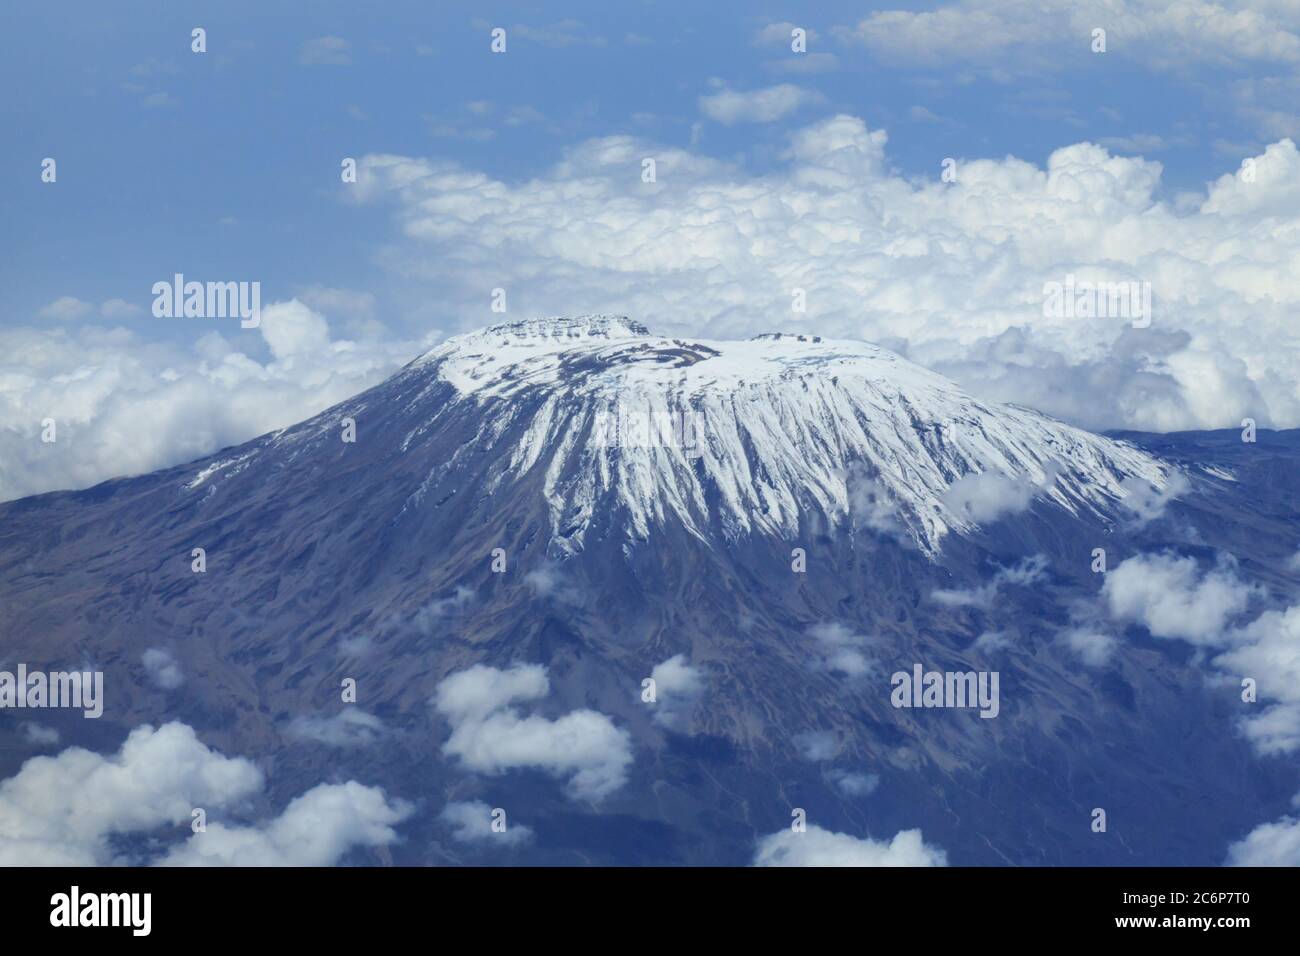 An aerial view of Mount Kilimanjaro, taken from the flight deck of an airplane Stock Photo